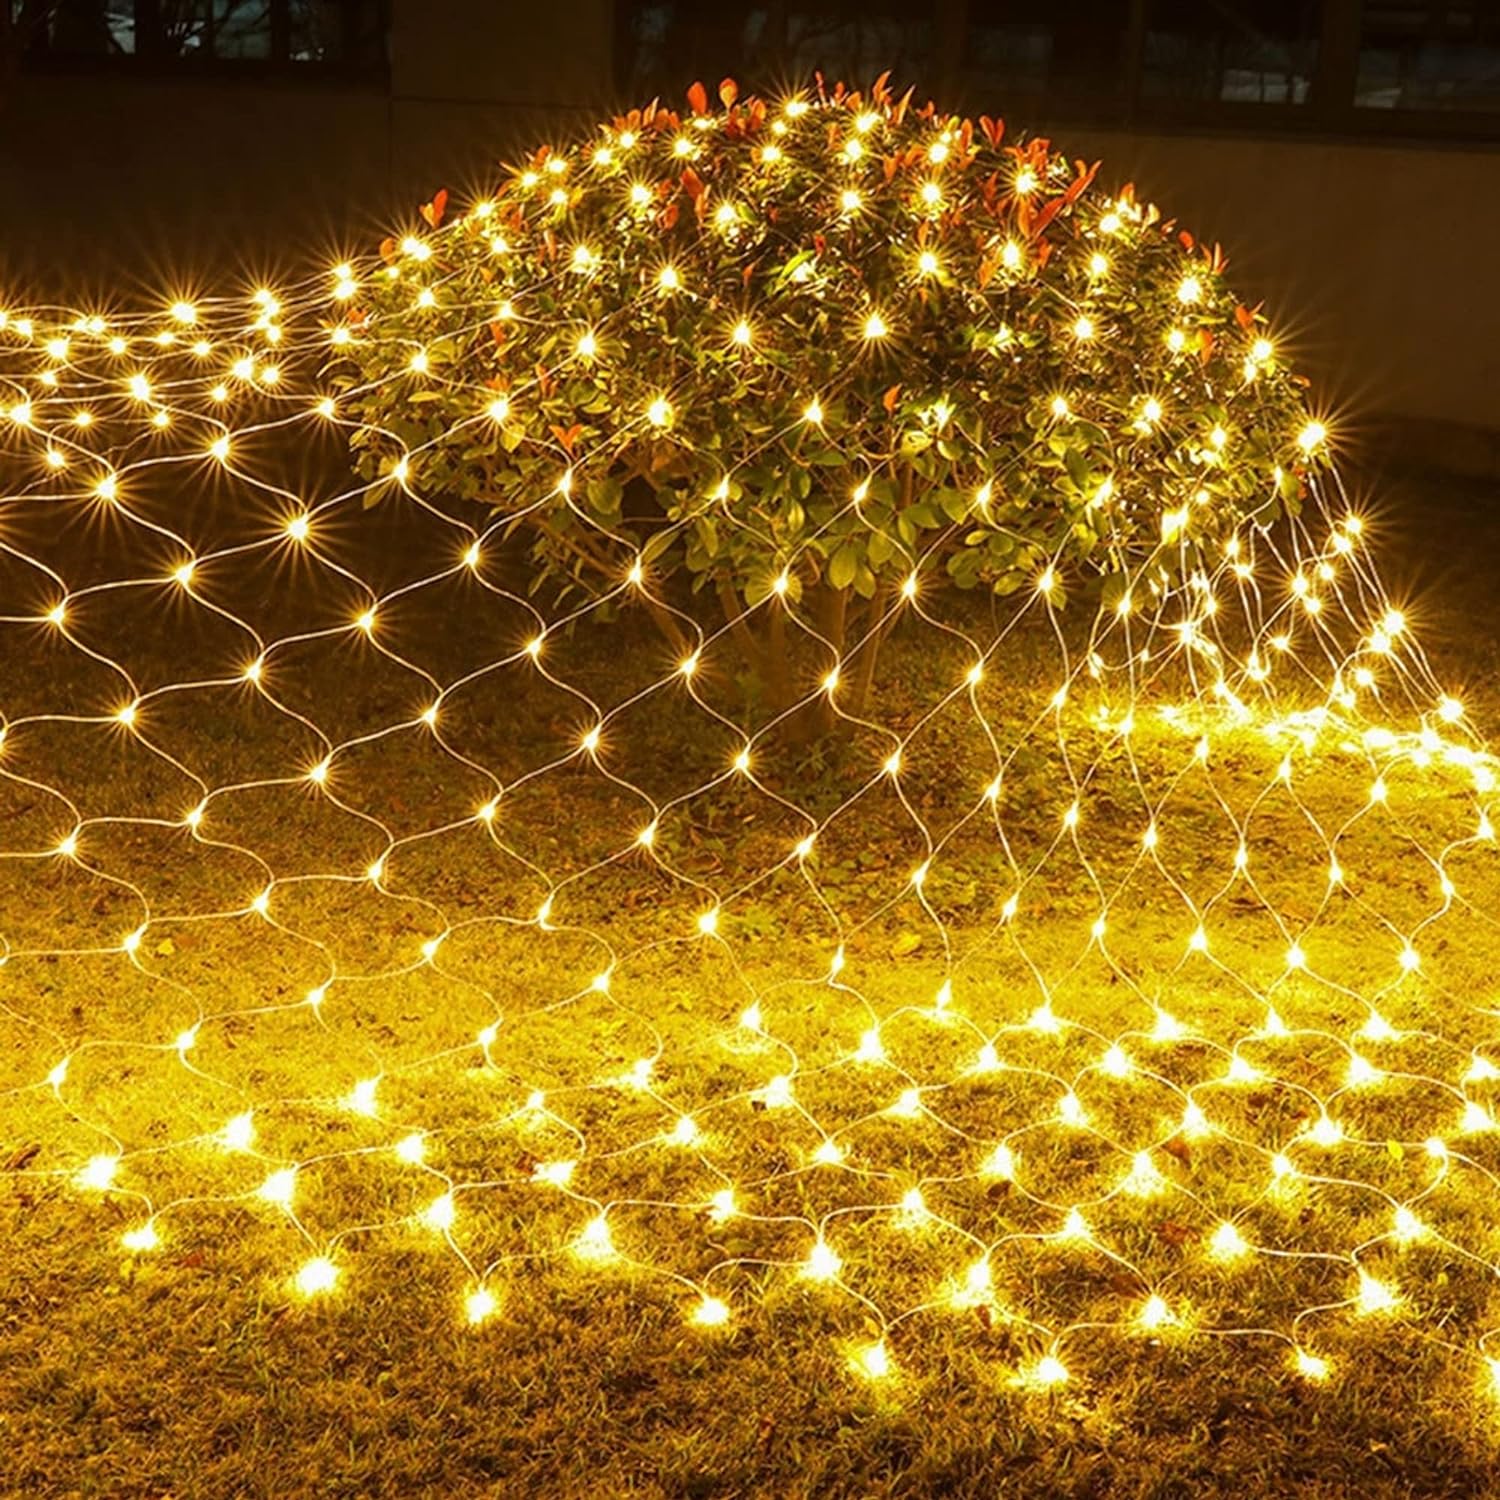 Dazzle Bright Christmas 360 LED Net Lights, 12FT x 5 FT Connectable Waterproof String Lights with 8 Modes, Christmas Decorations for Indoor Outdoor Xmas Party Yard Garden Decor (Warm White)